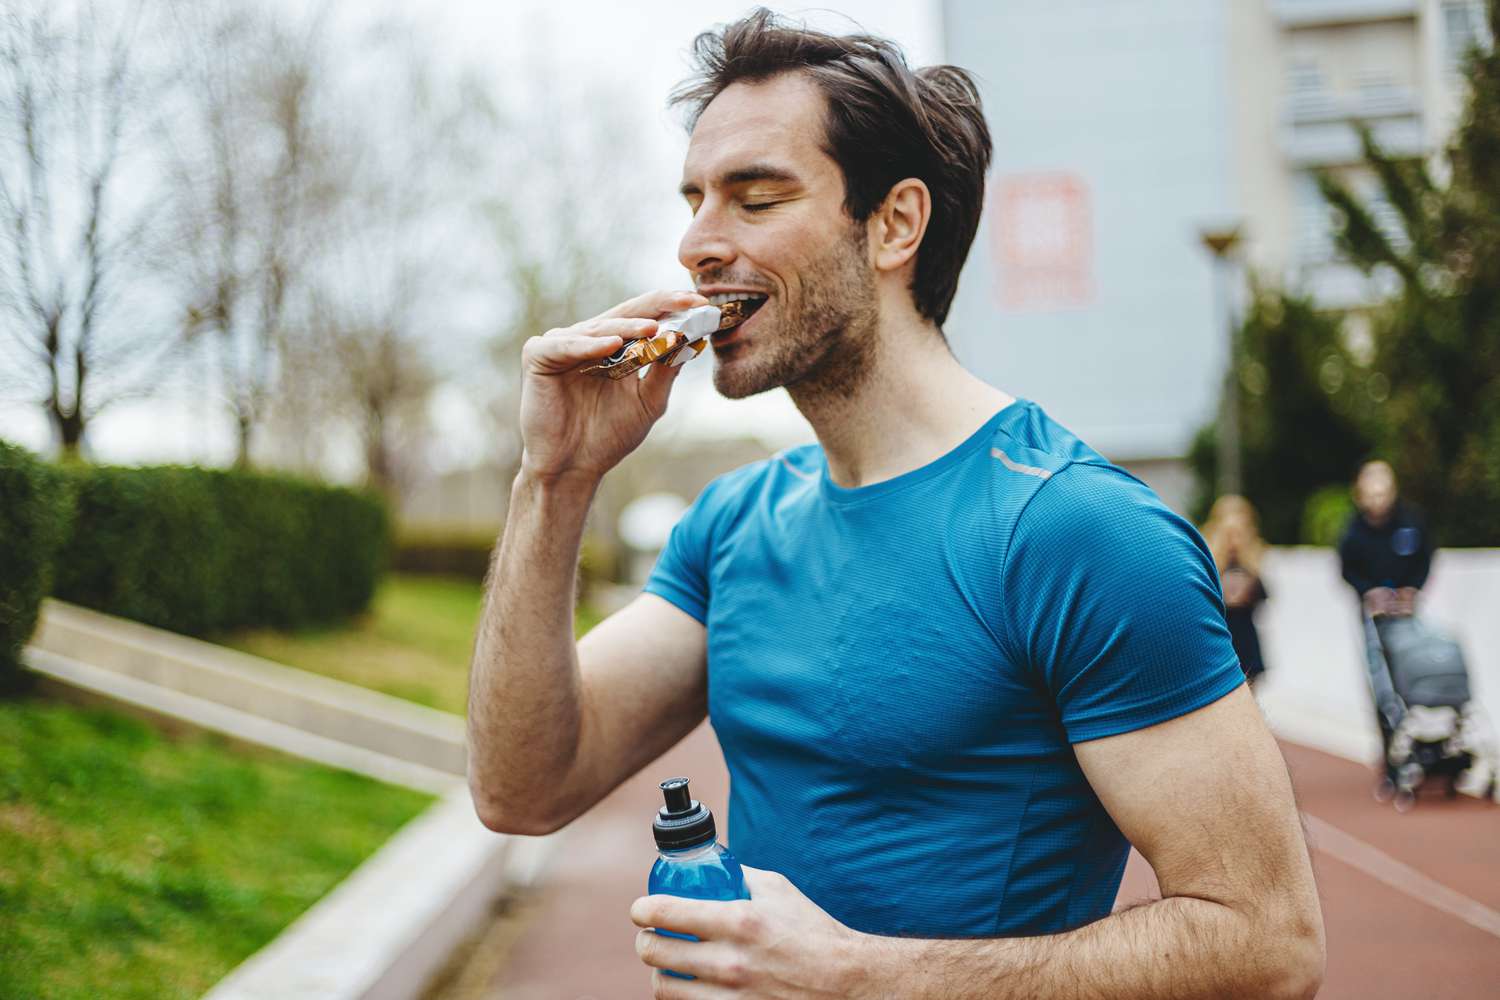 Male athlete eating protein bar